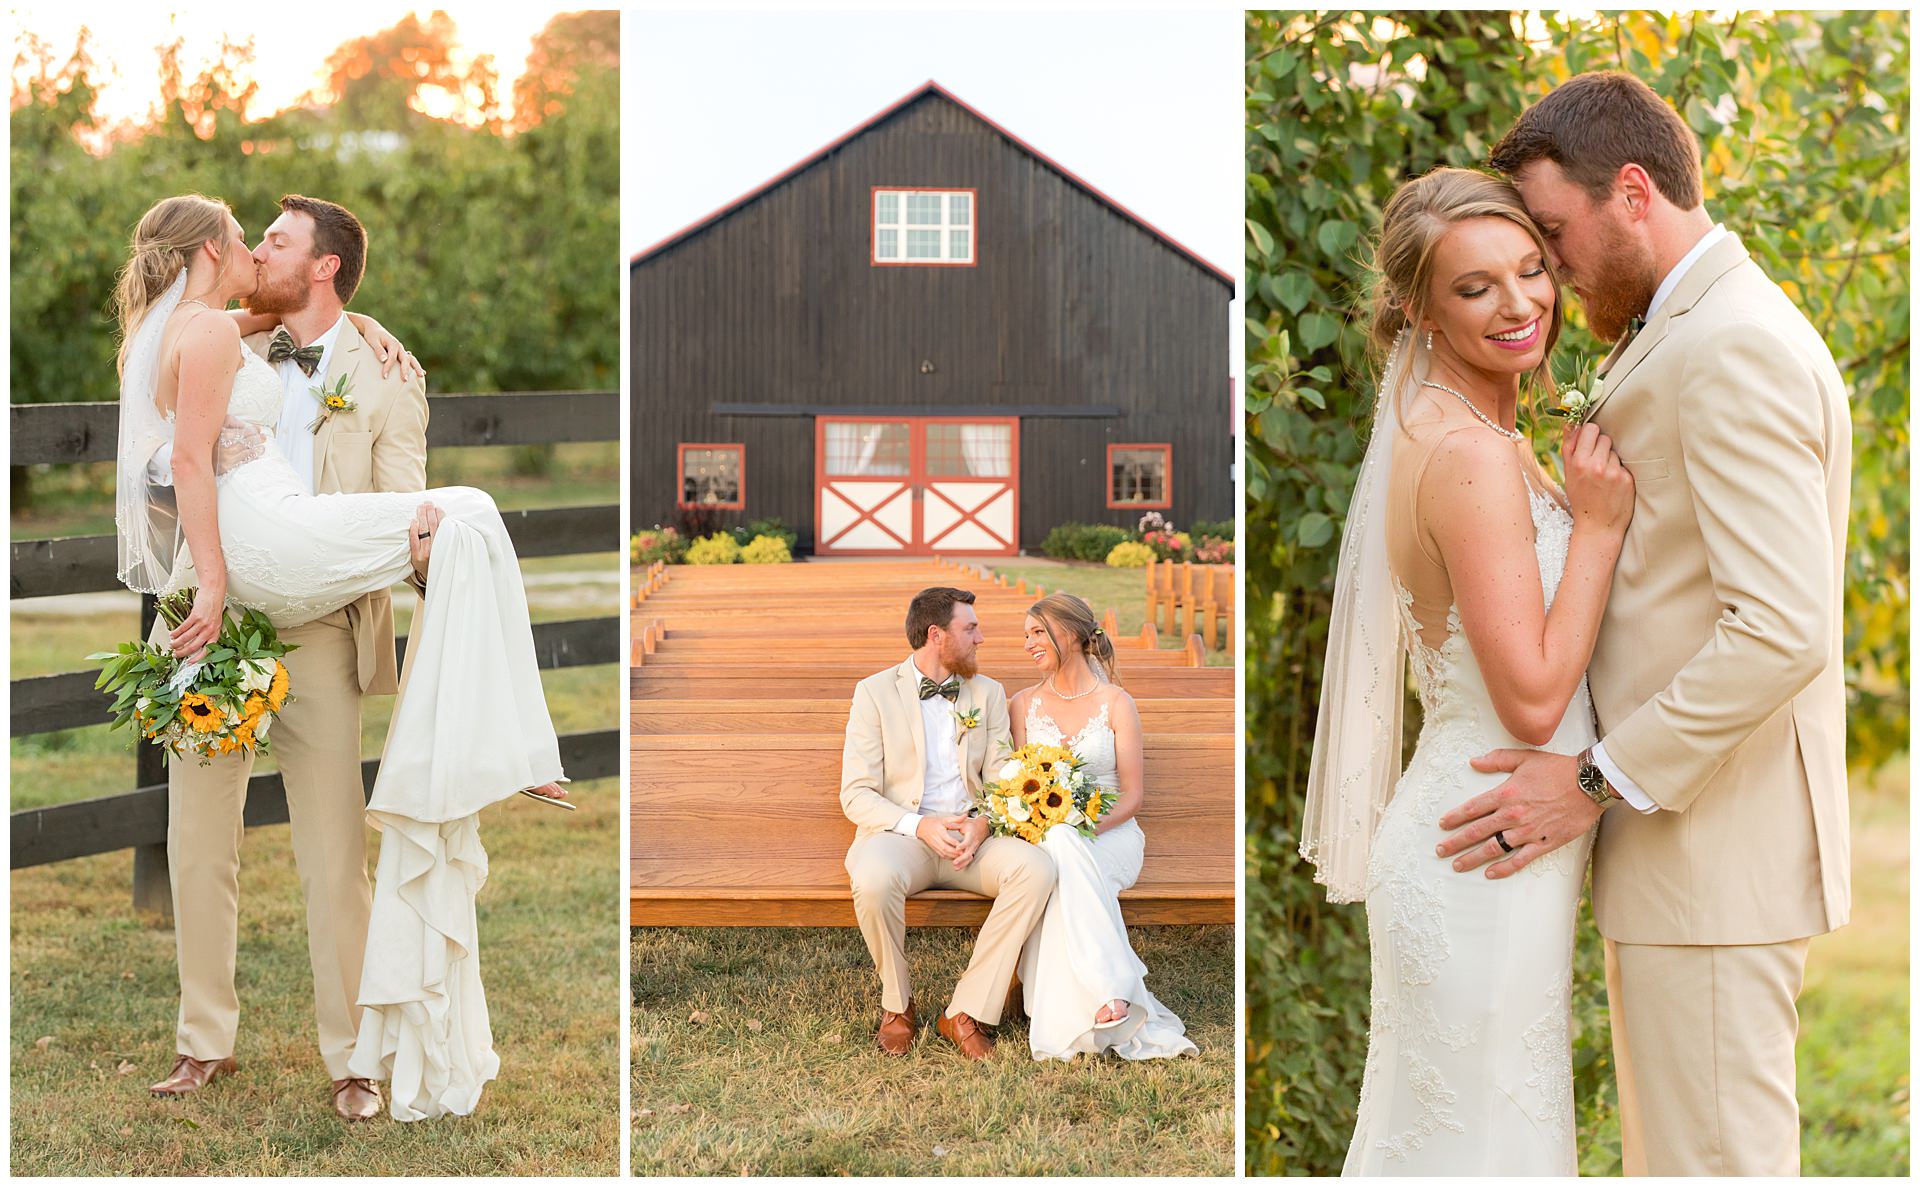 Fall Wedding Photos at Evans Orchard Event Barn in Georgetown, Kentucky